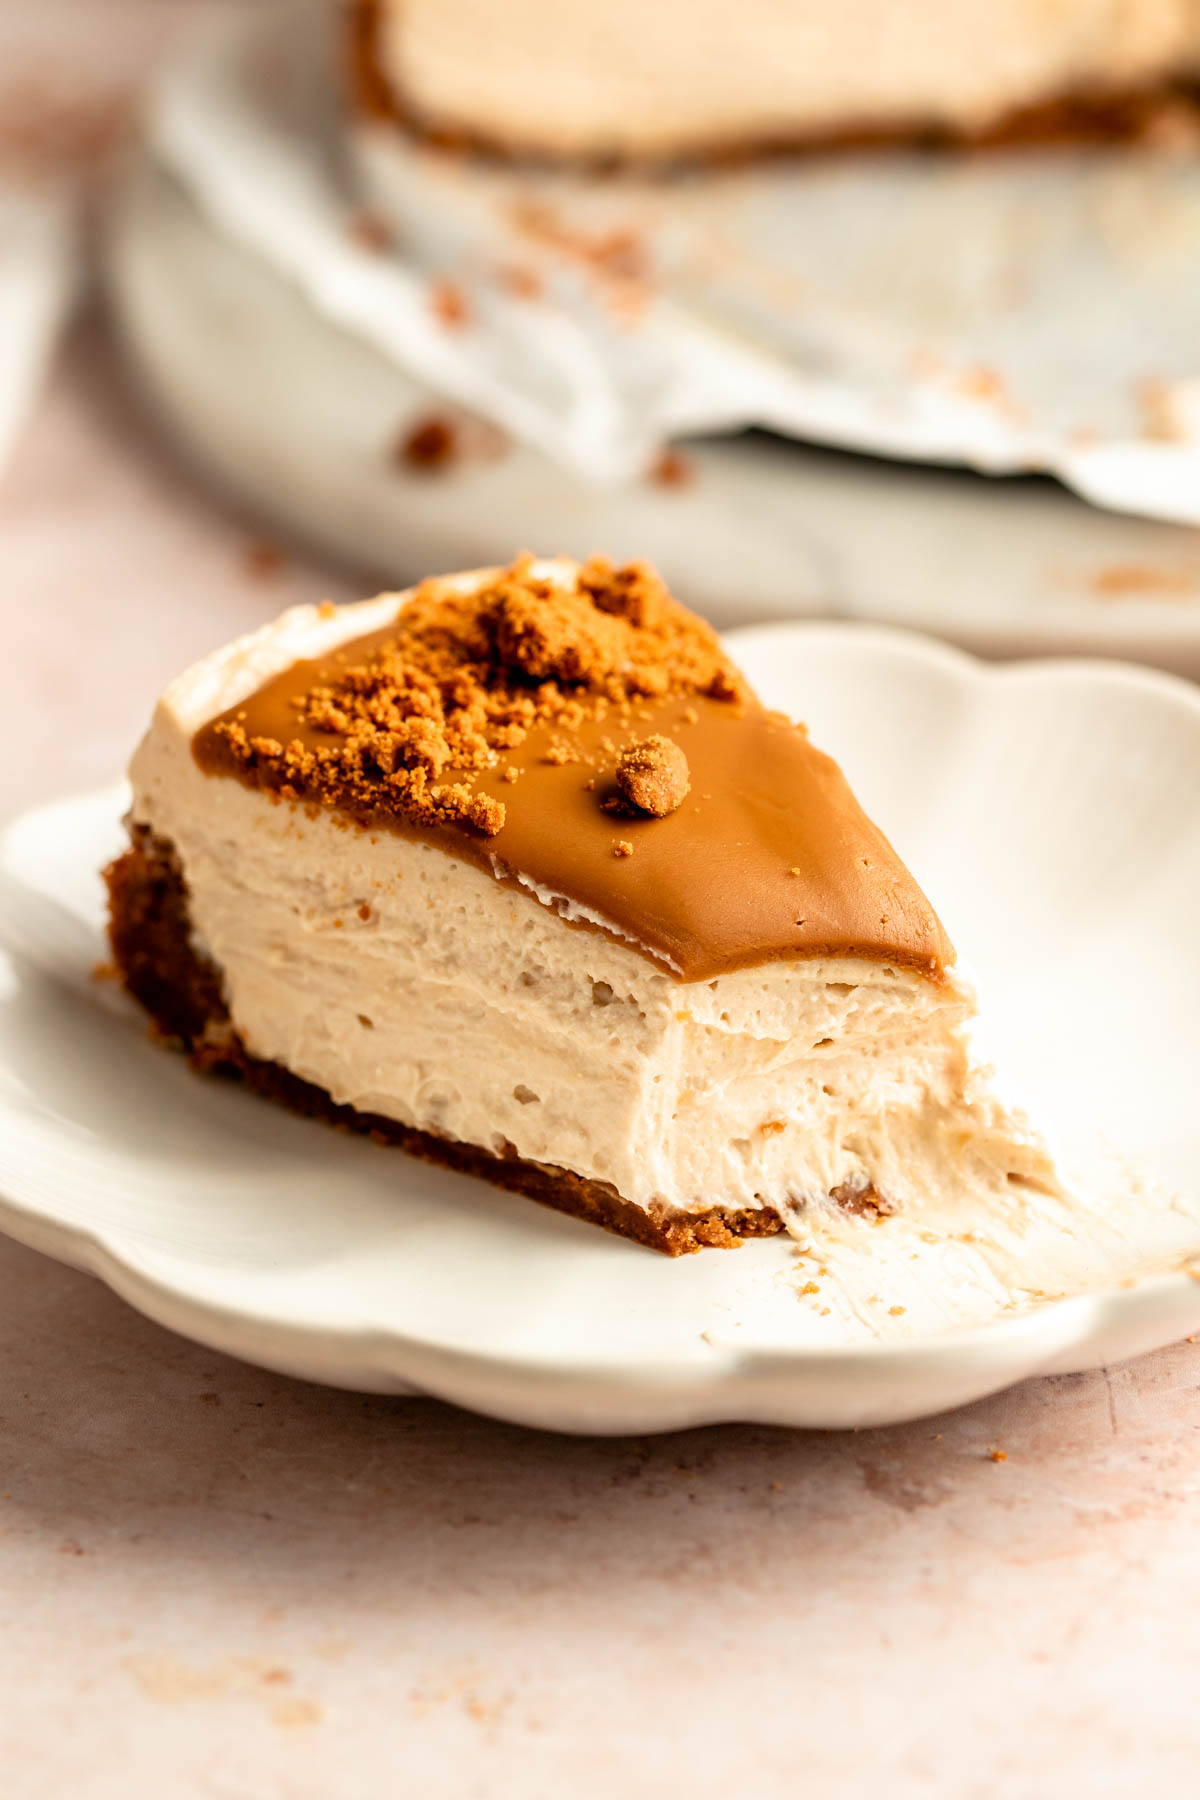 Slice of no bake biscoff cheesecake with a bite missing.